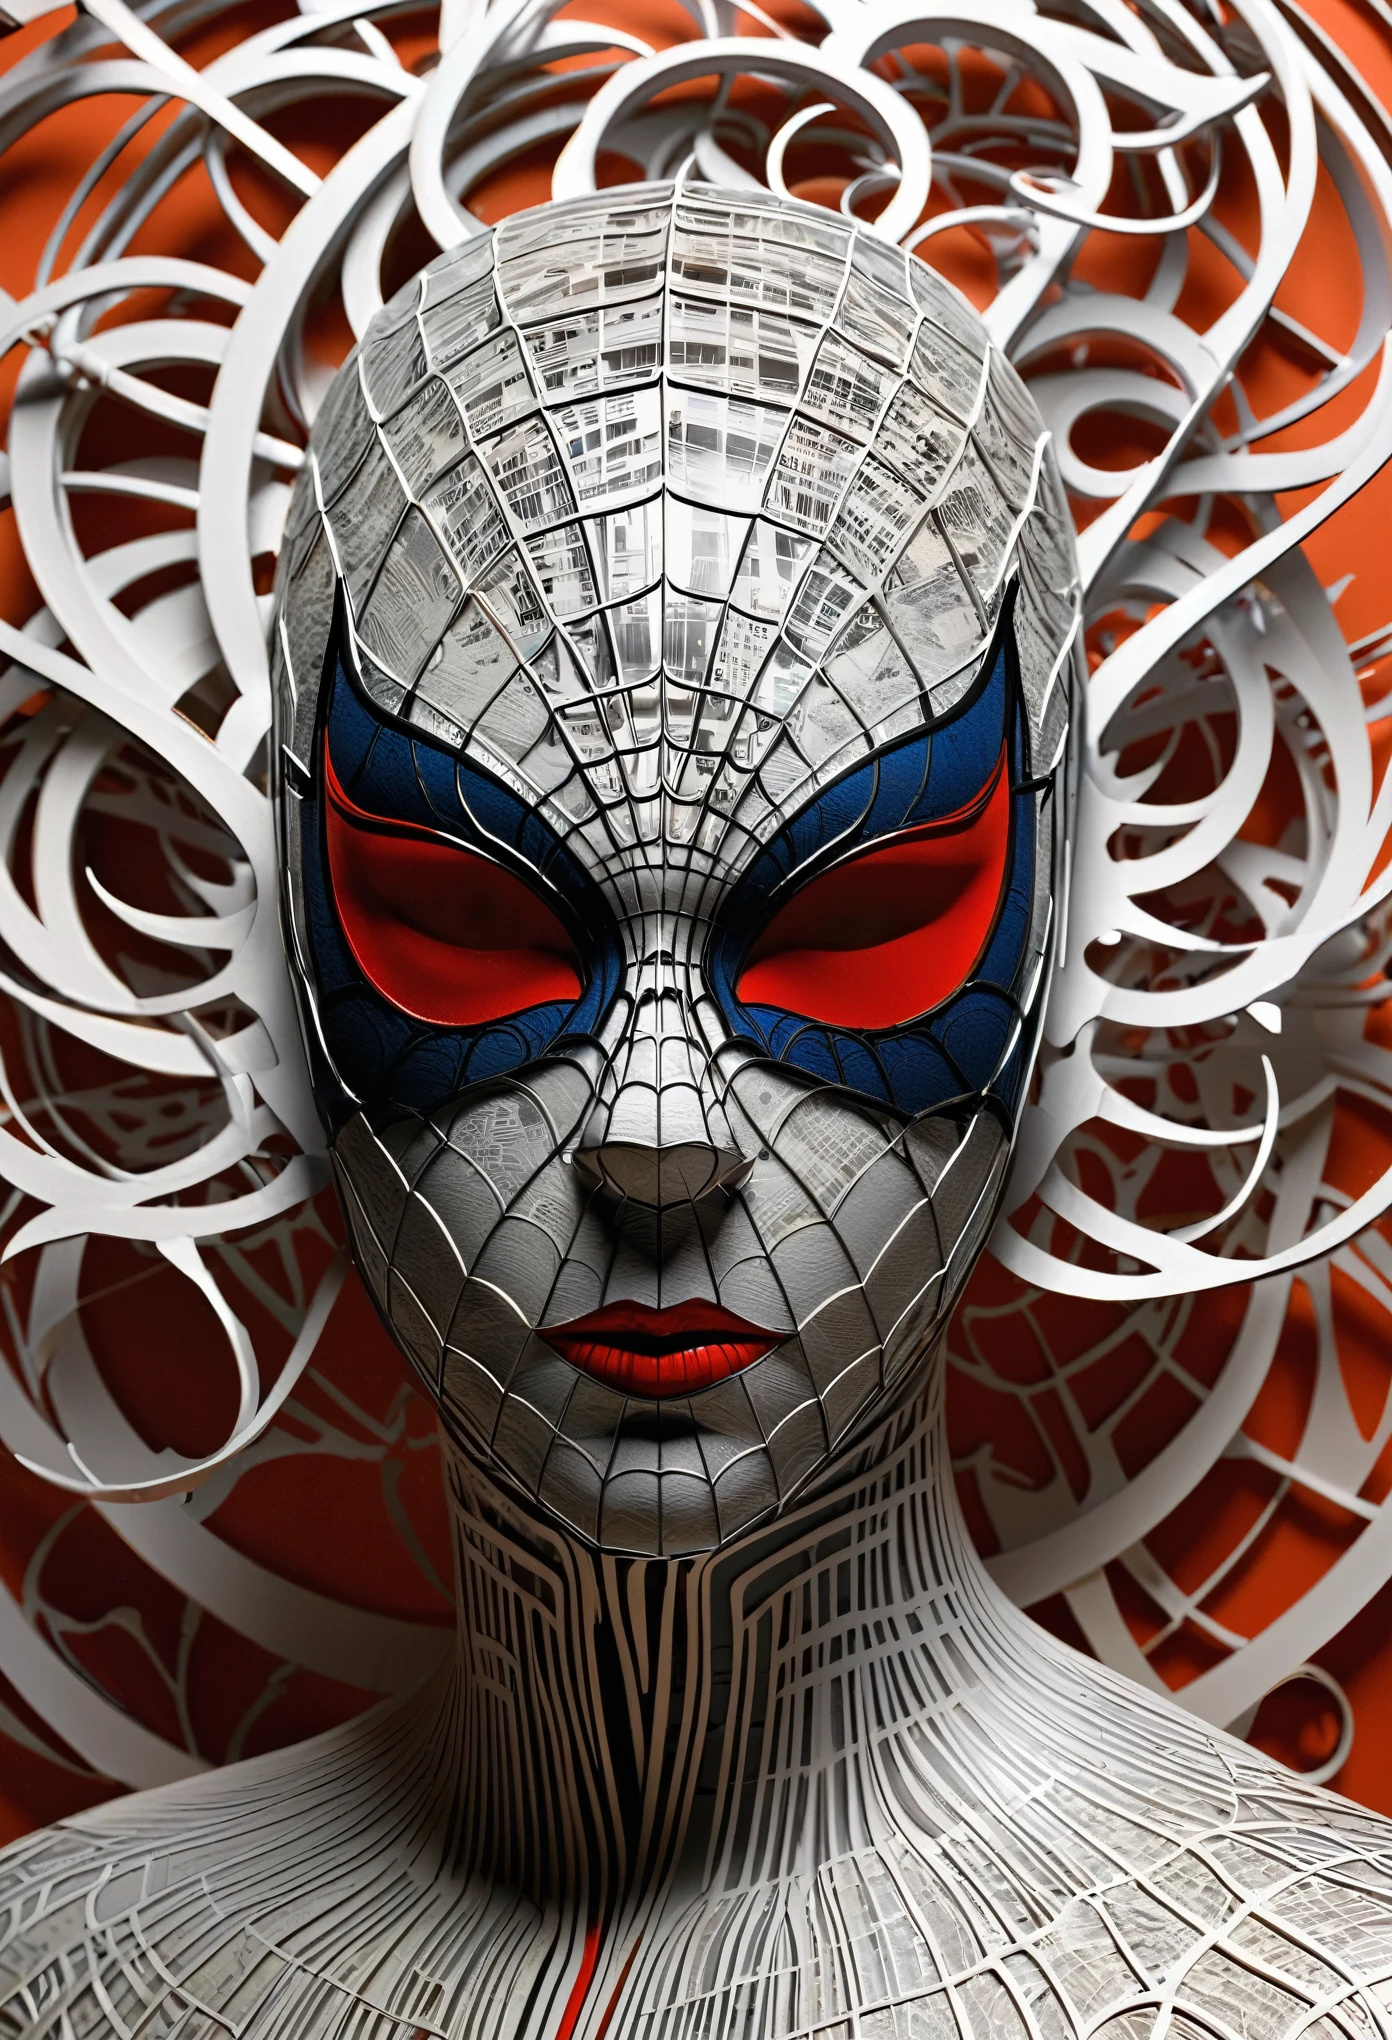  arafed image of a Newspaper with a spidermanpaper cut out of a head, 3D portrait, complicated 3D illustration, Newspaper illustration, detailed head, 3D-Illustration, Newspaper photography, by Matt Stewart, printed on paper, Newspaper, Detailed 3D digital art, hyper detailed face, inspired by Igor Morski, Newspaper style, made of paper, Futuristic Typography